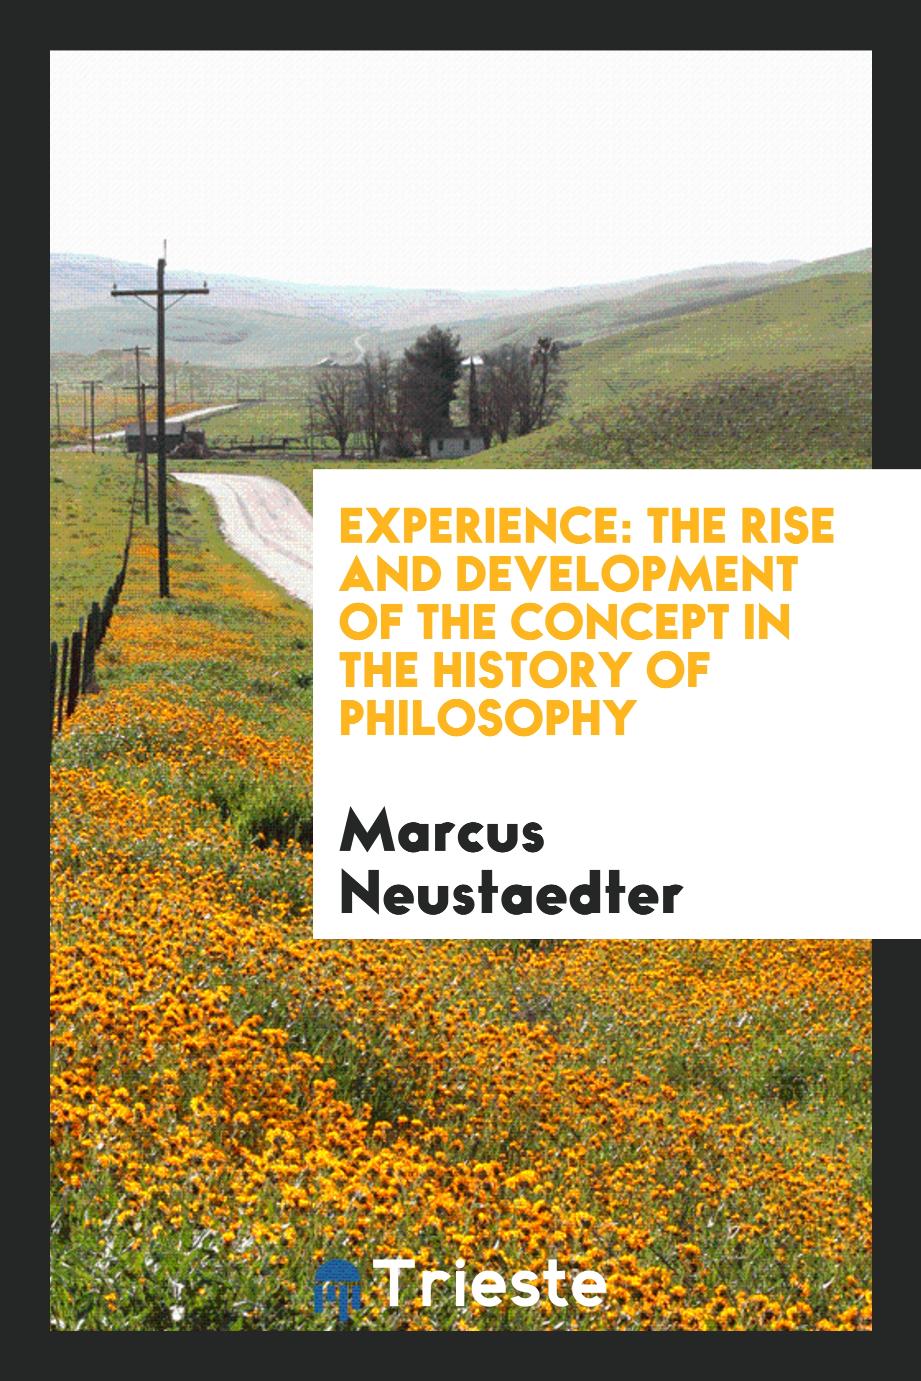 Experience: The Rise and Development of the Concept in the History of Philosophy